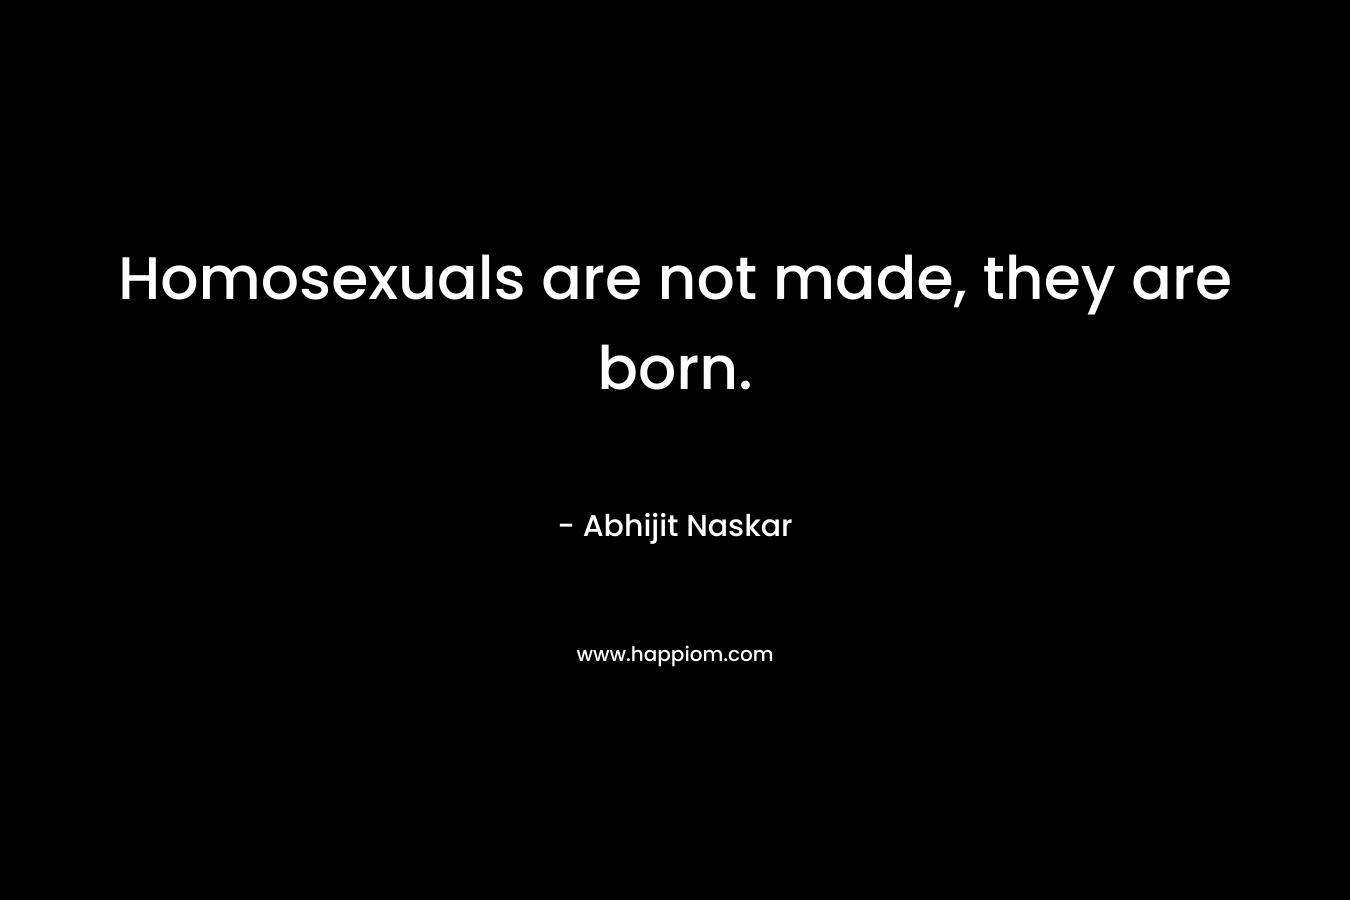 Homosexuals are not made, they are born. – Abhijit Naskar